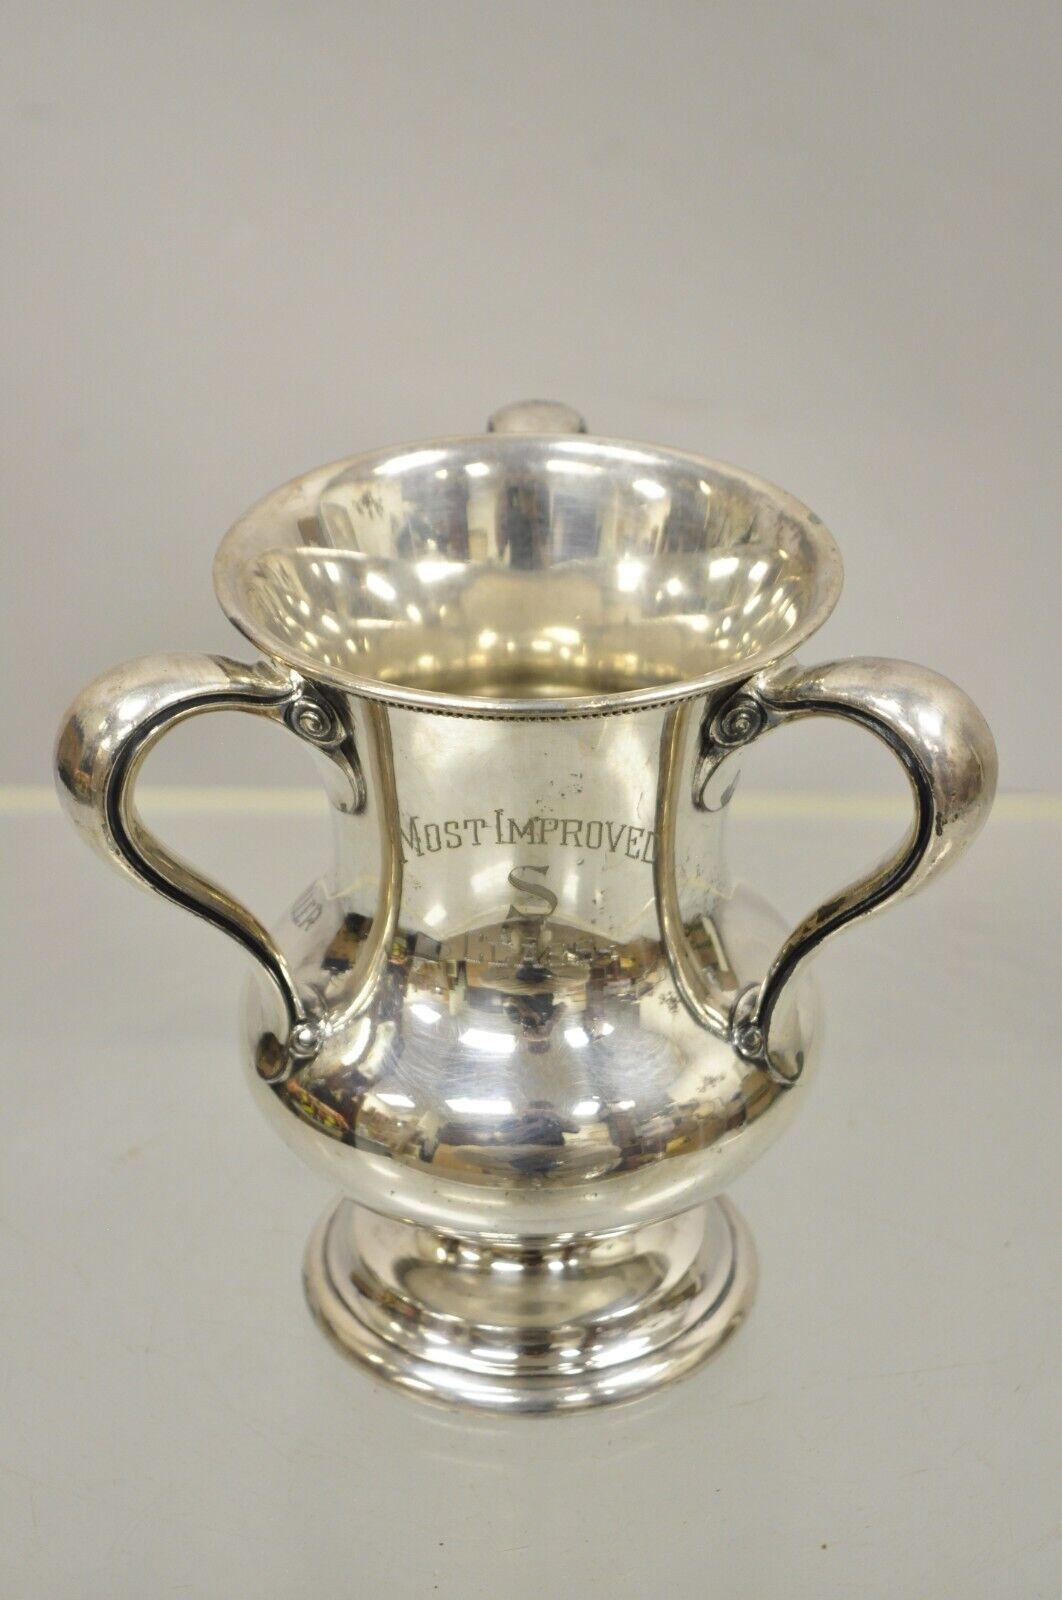 Regency Wallace Brothers Silver Plated Three Handle Trophy Loving Cup Award 1st Prize For Sale